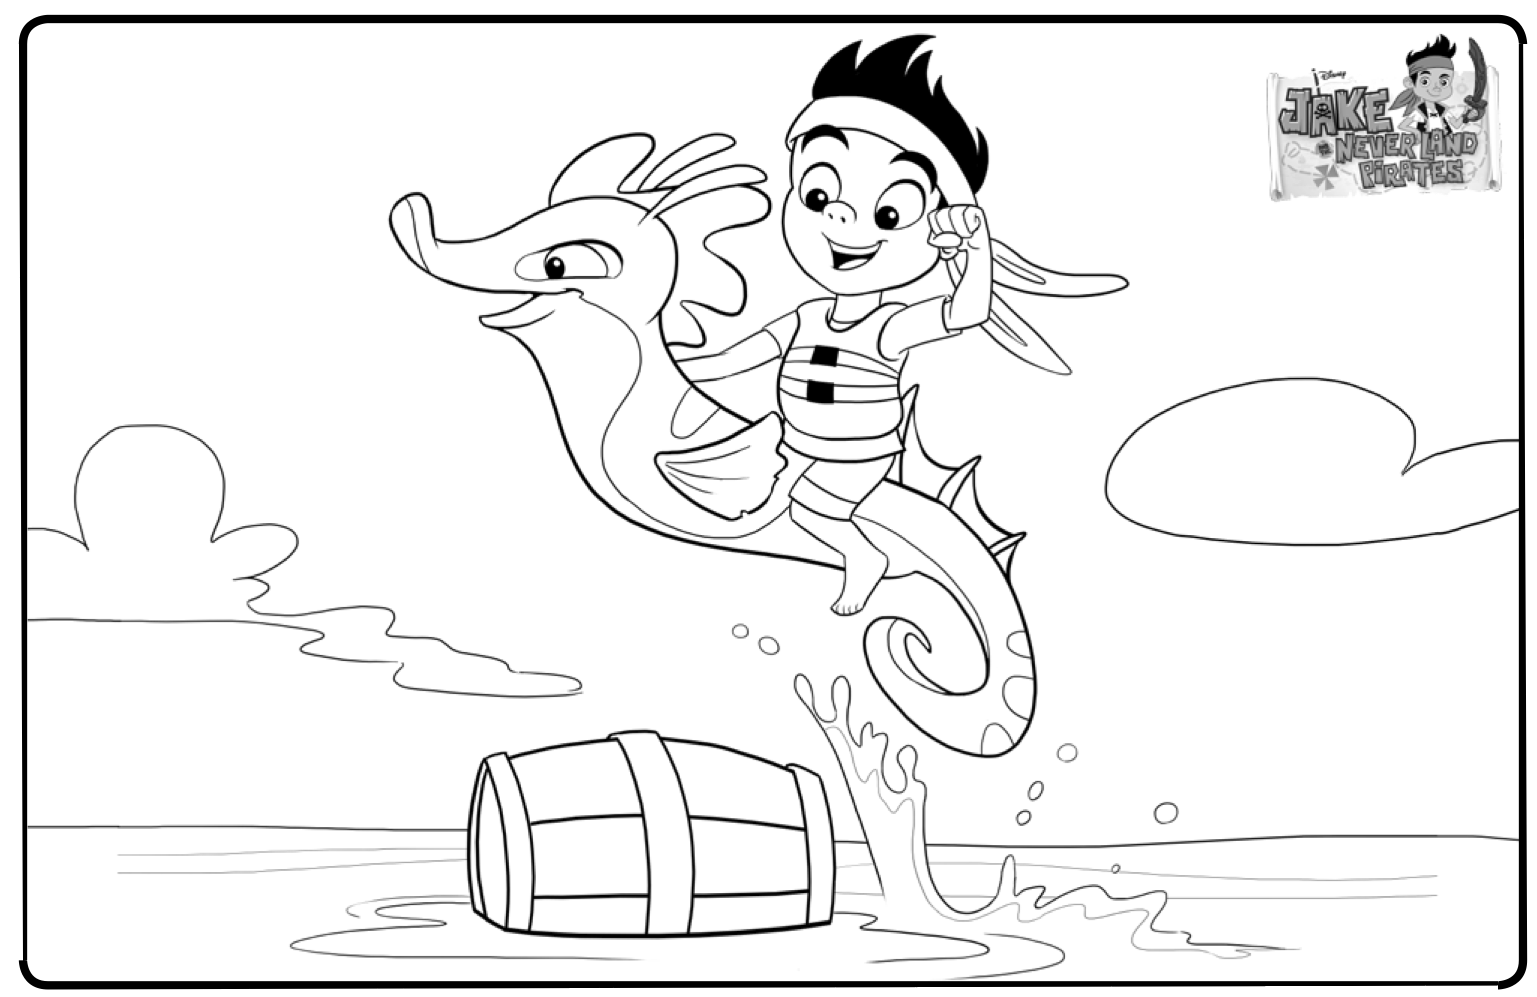 Jake - Coloring Pages for Kids and for Adults